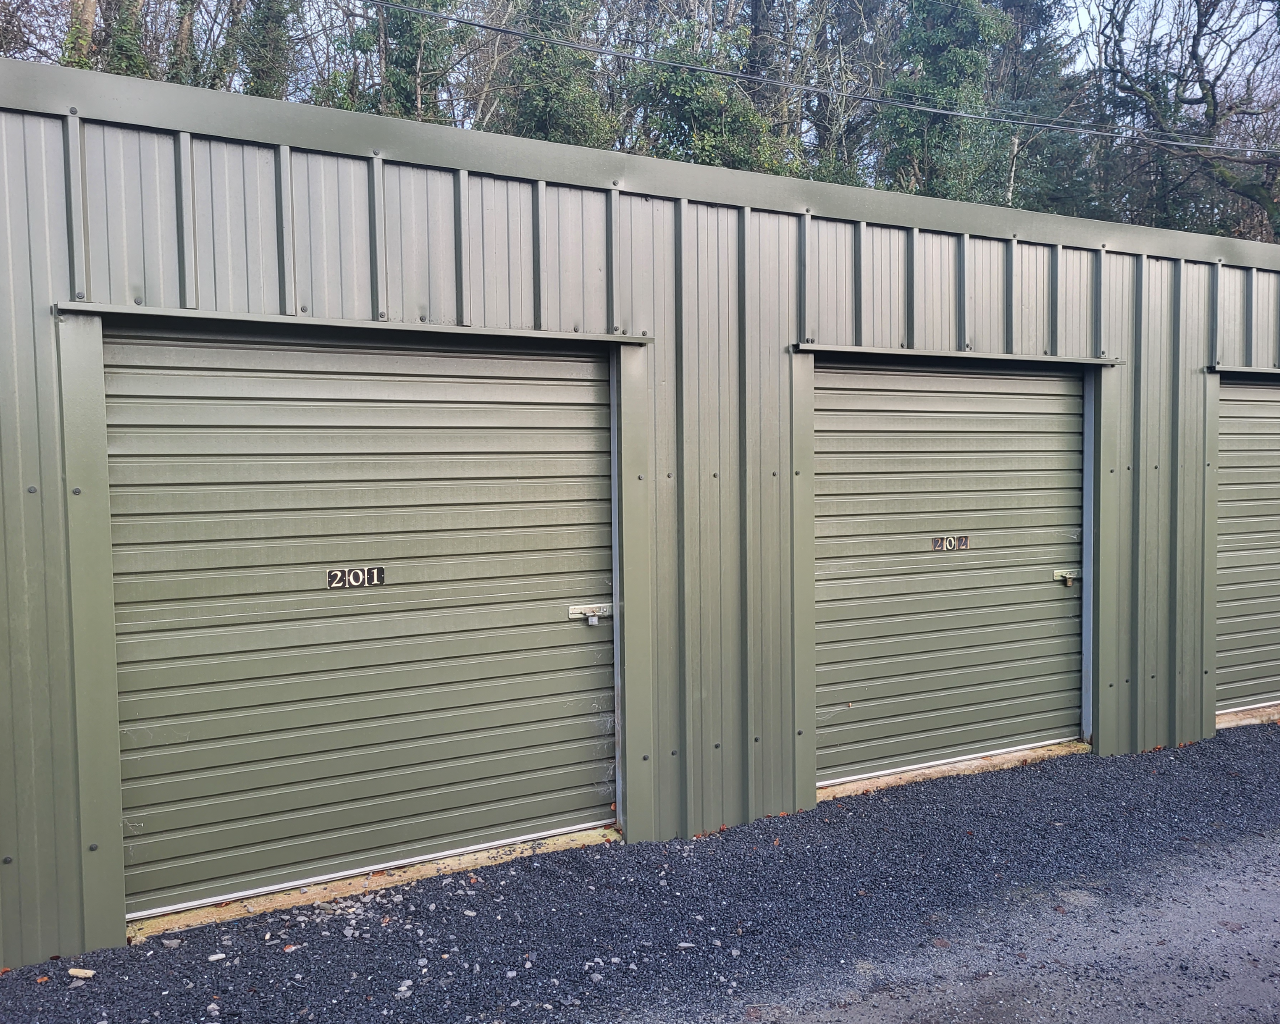 Photo of outside storage containers.